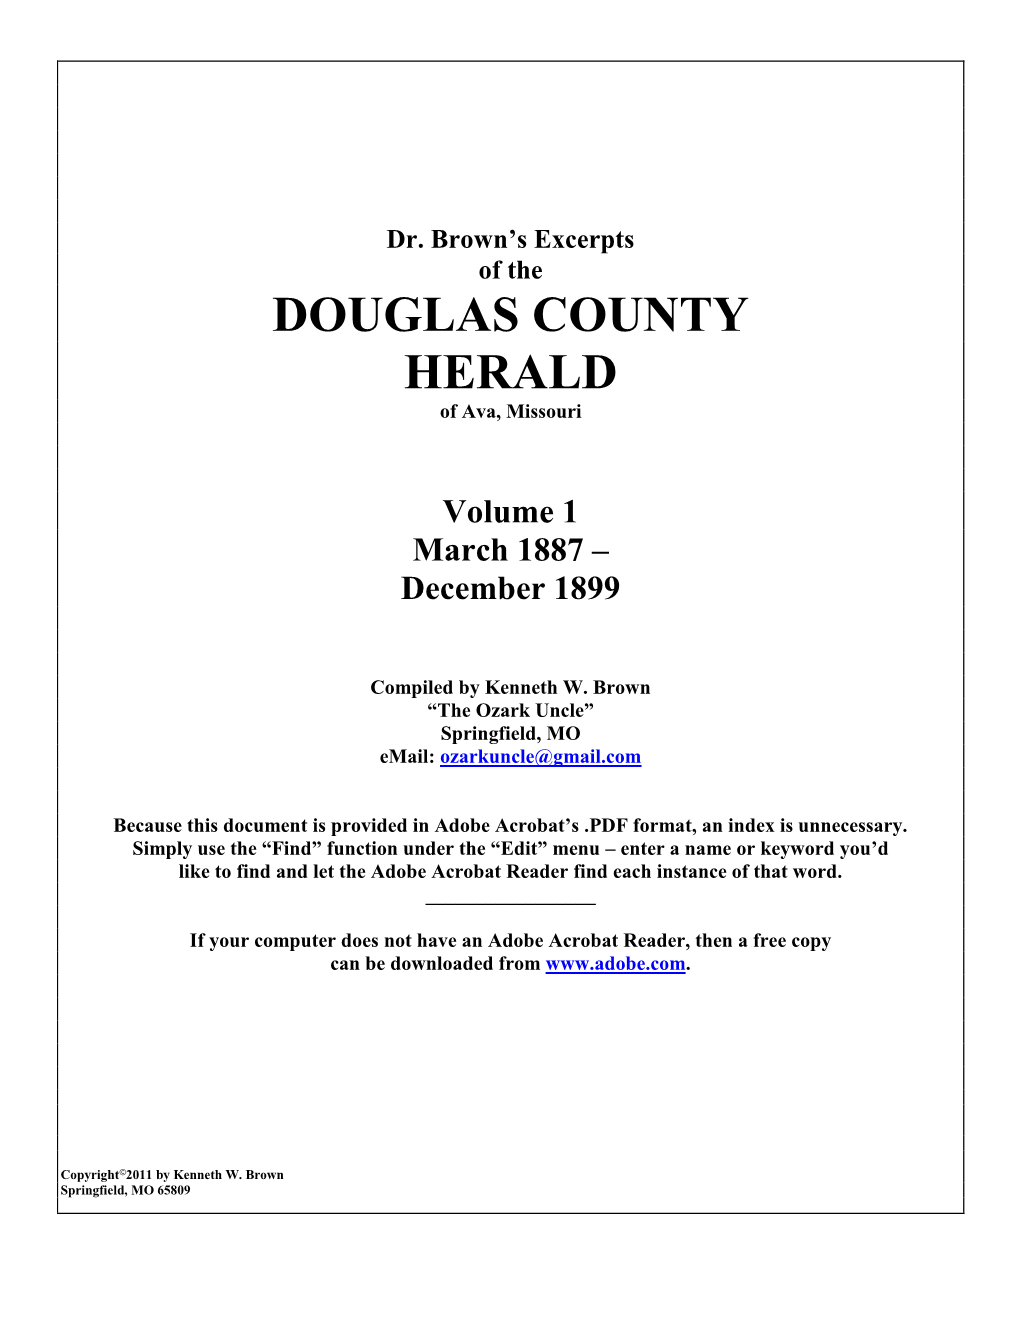 Douglas County Herald Came Into Existence and Has Been Published on a Weekly Basis Ever Since